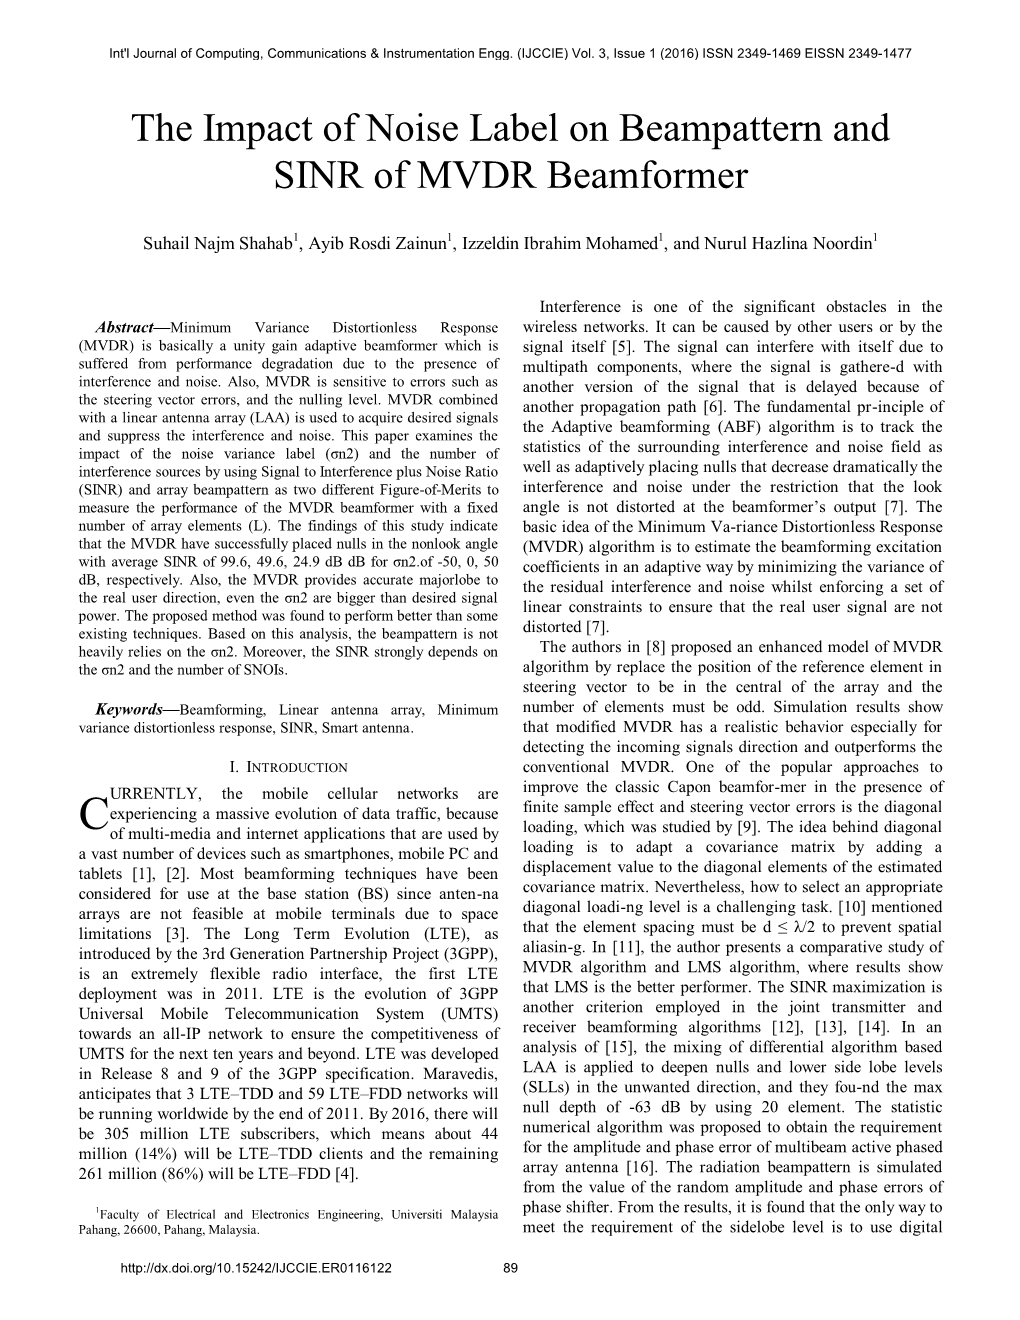 The Impact of Noise Label on Beampattern and SINR of MVDR Beamformer